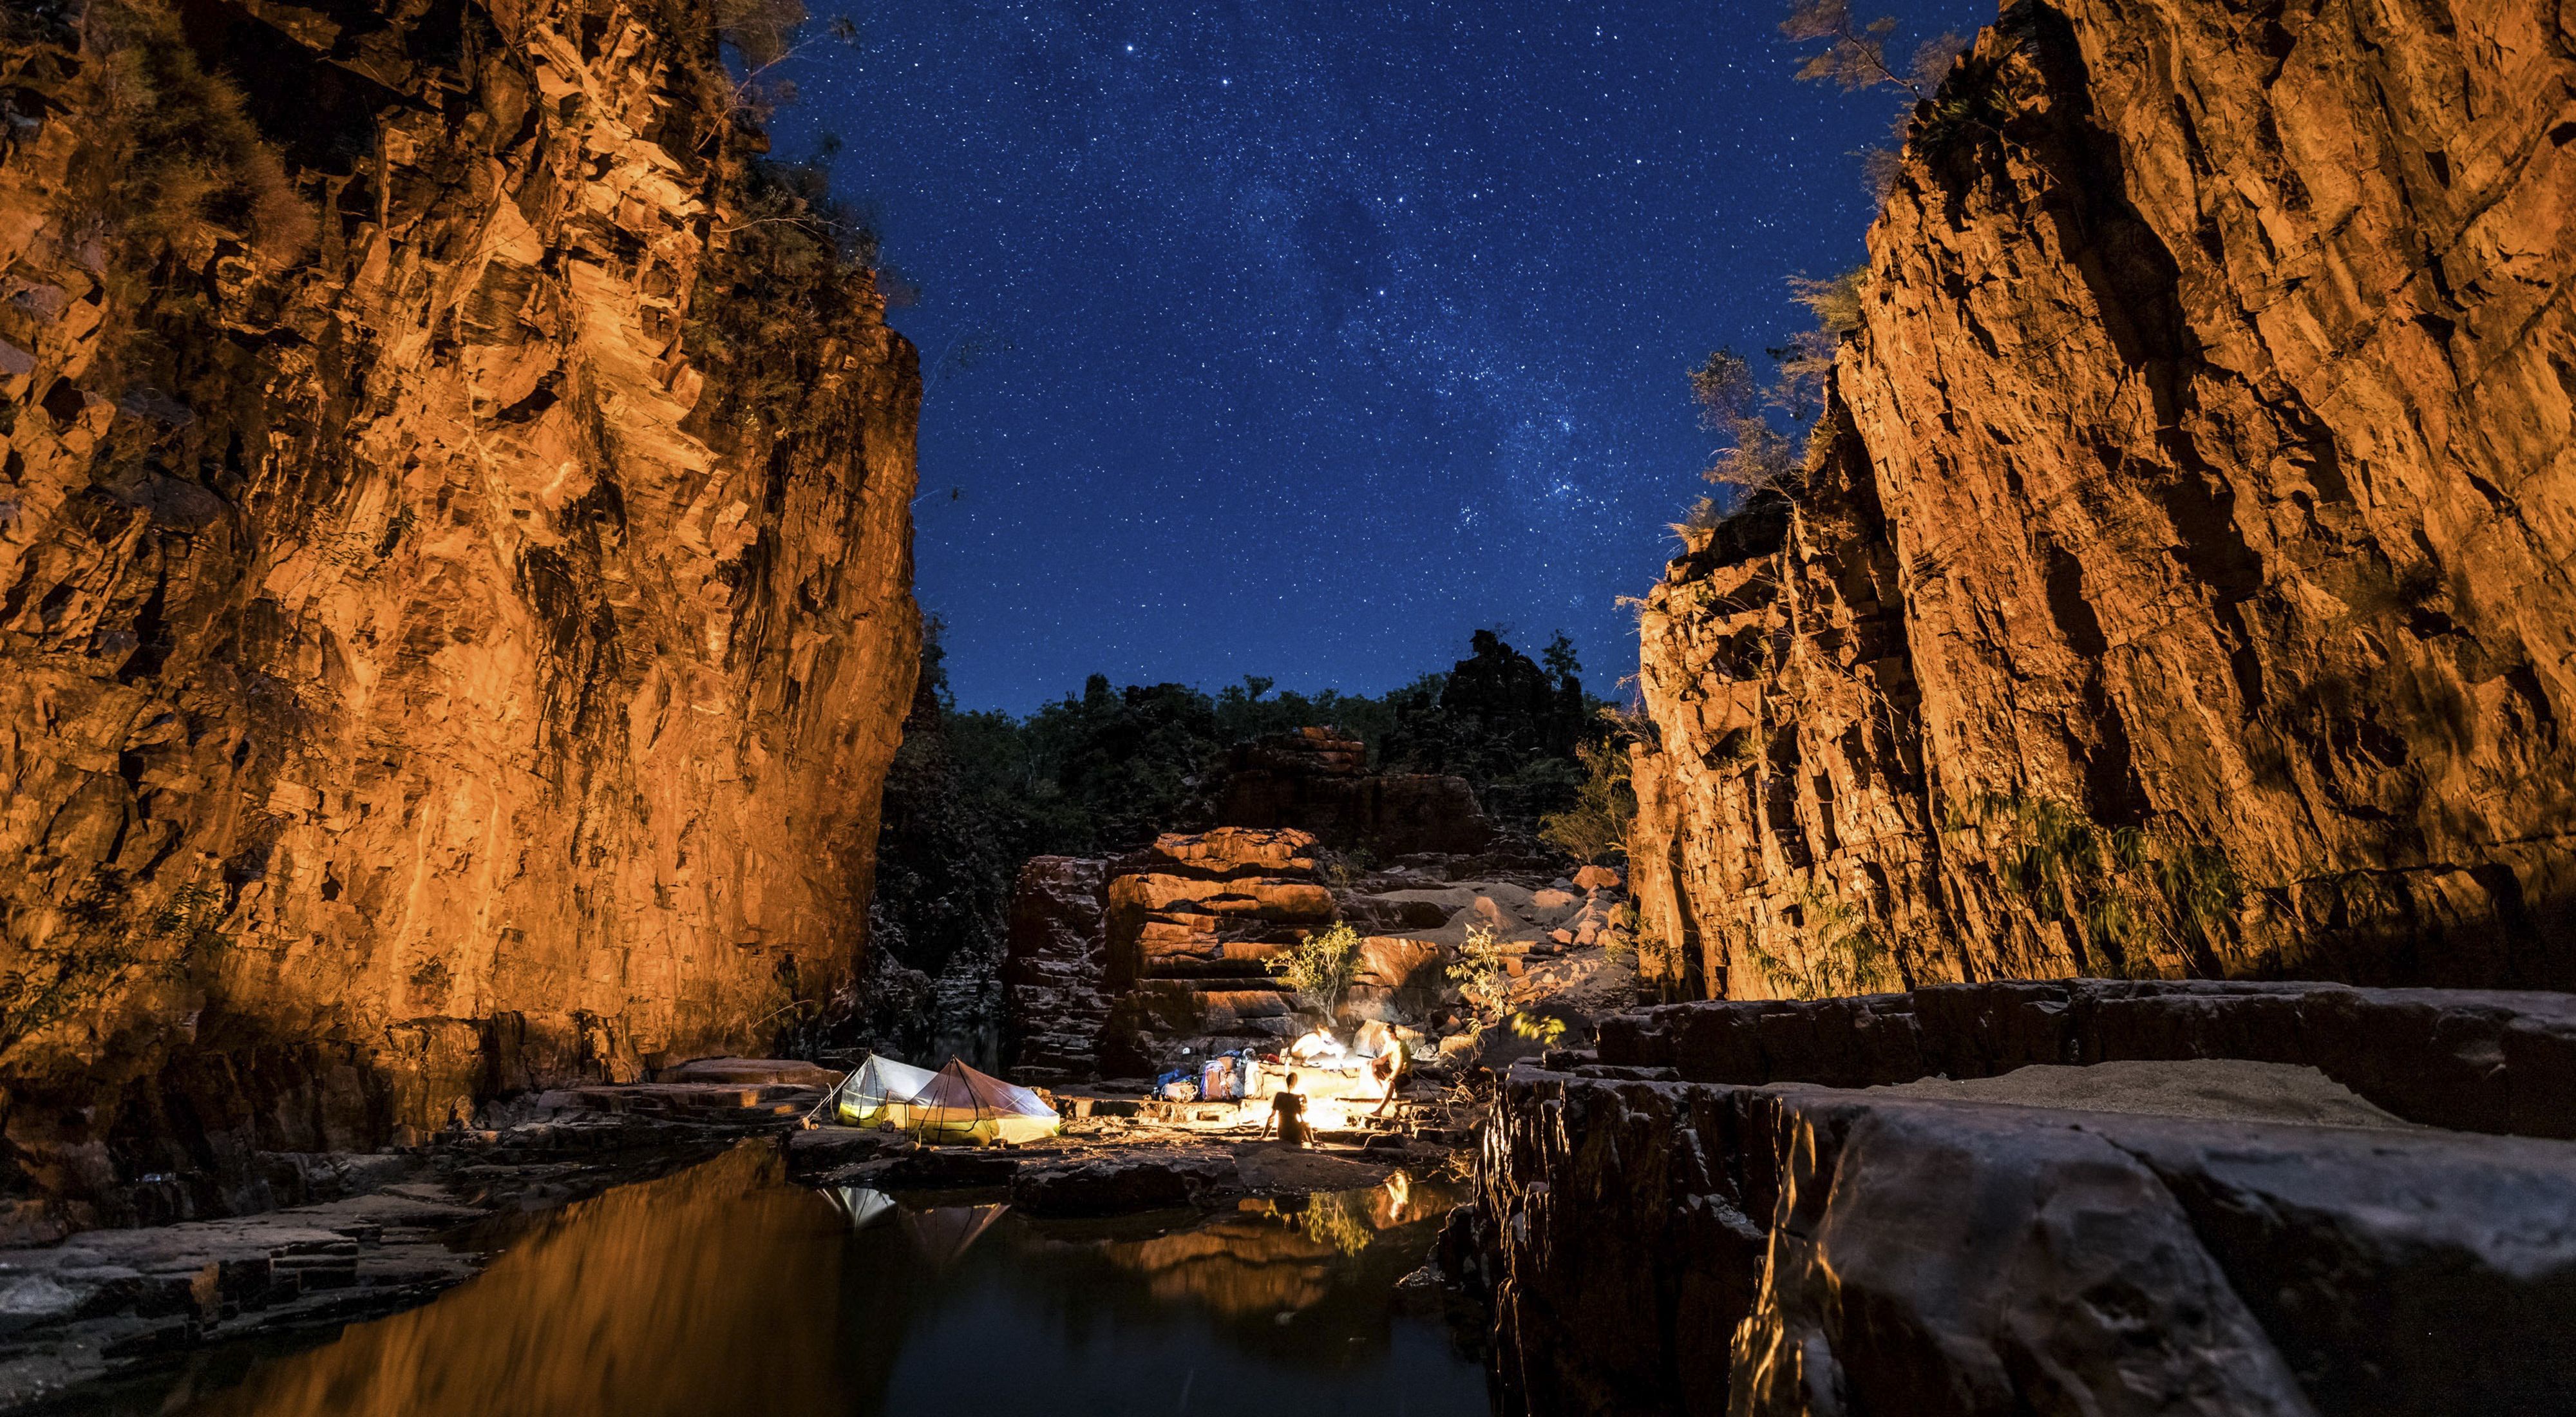 Camping under the stars in a remote sandstone gorge in the Northern Territory